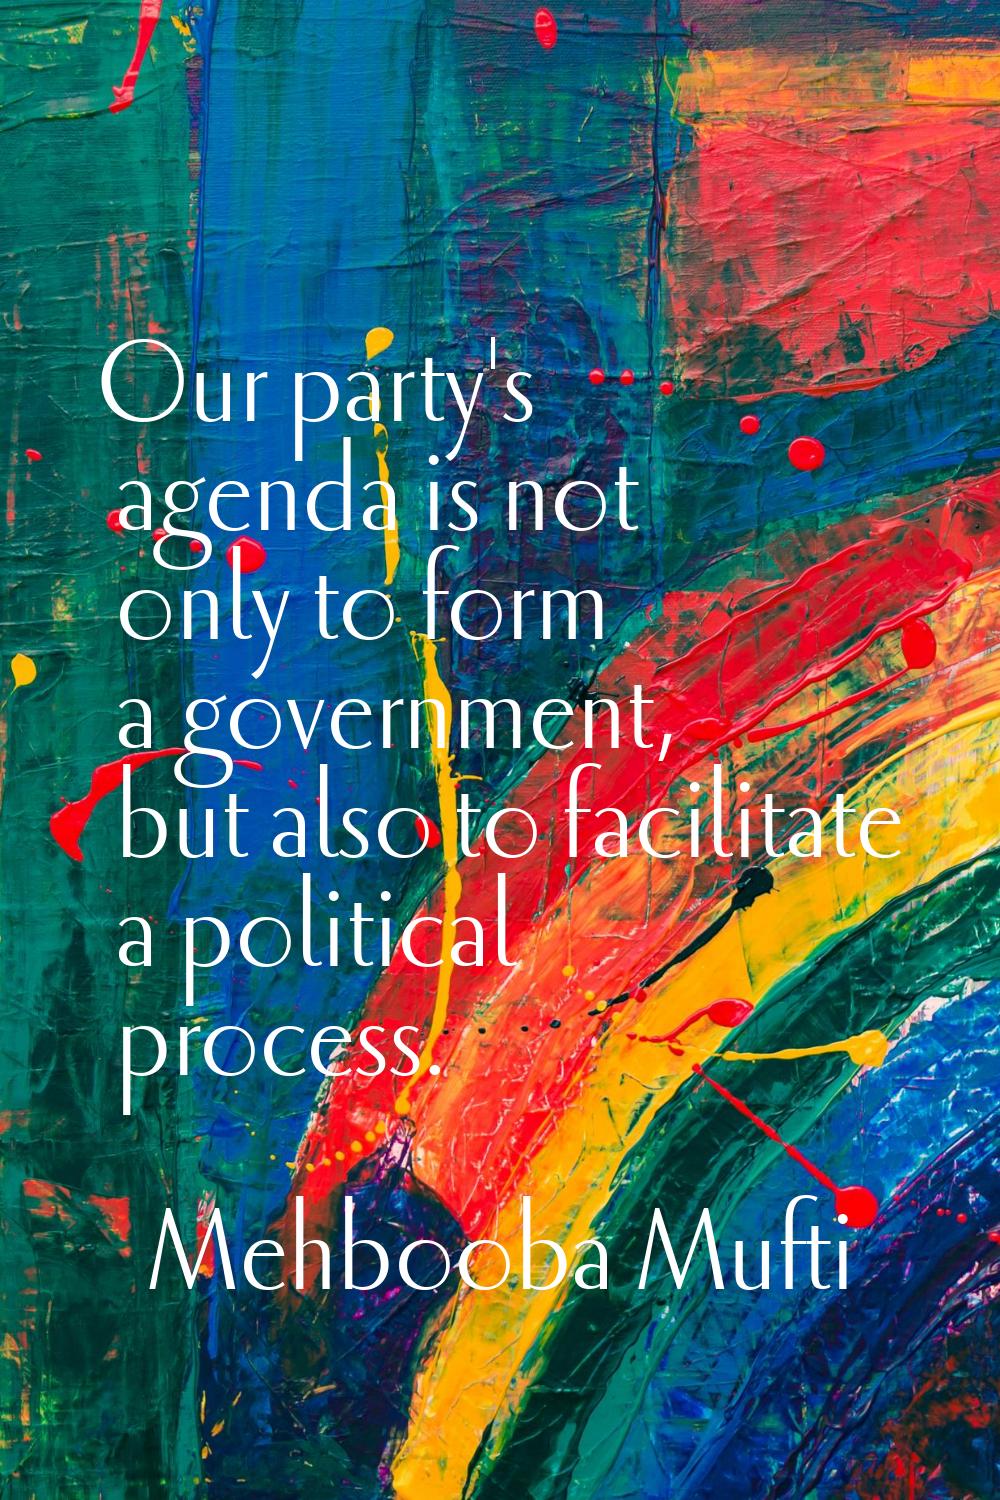 Our party's agenda is not only to form a government, but also to facilitate a political process.